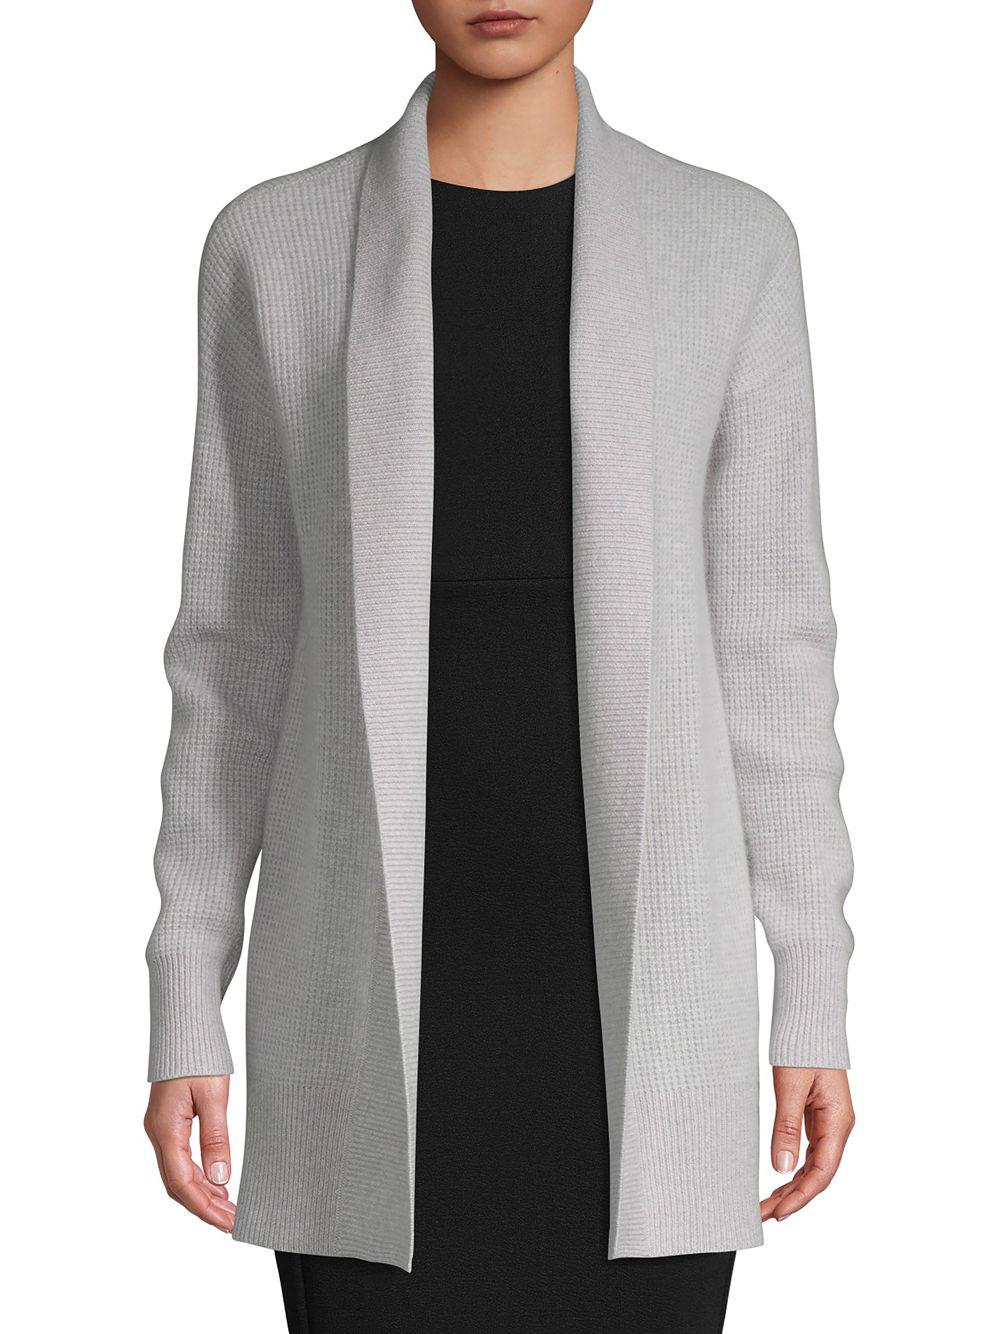 Lyst - Saks Fifth Avenue Open-front Cashmere Cardigan in Gray